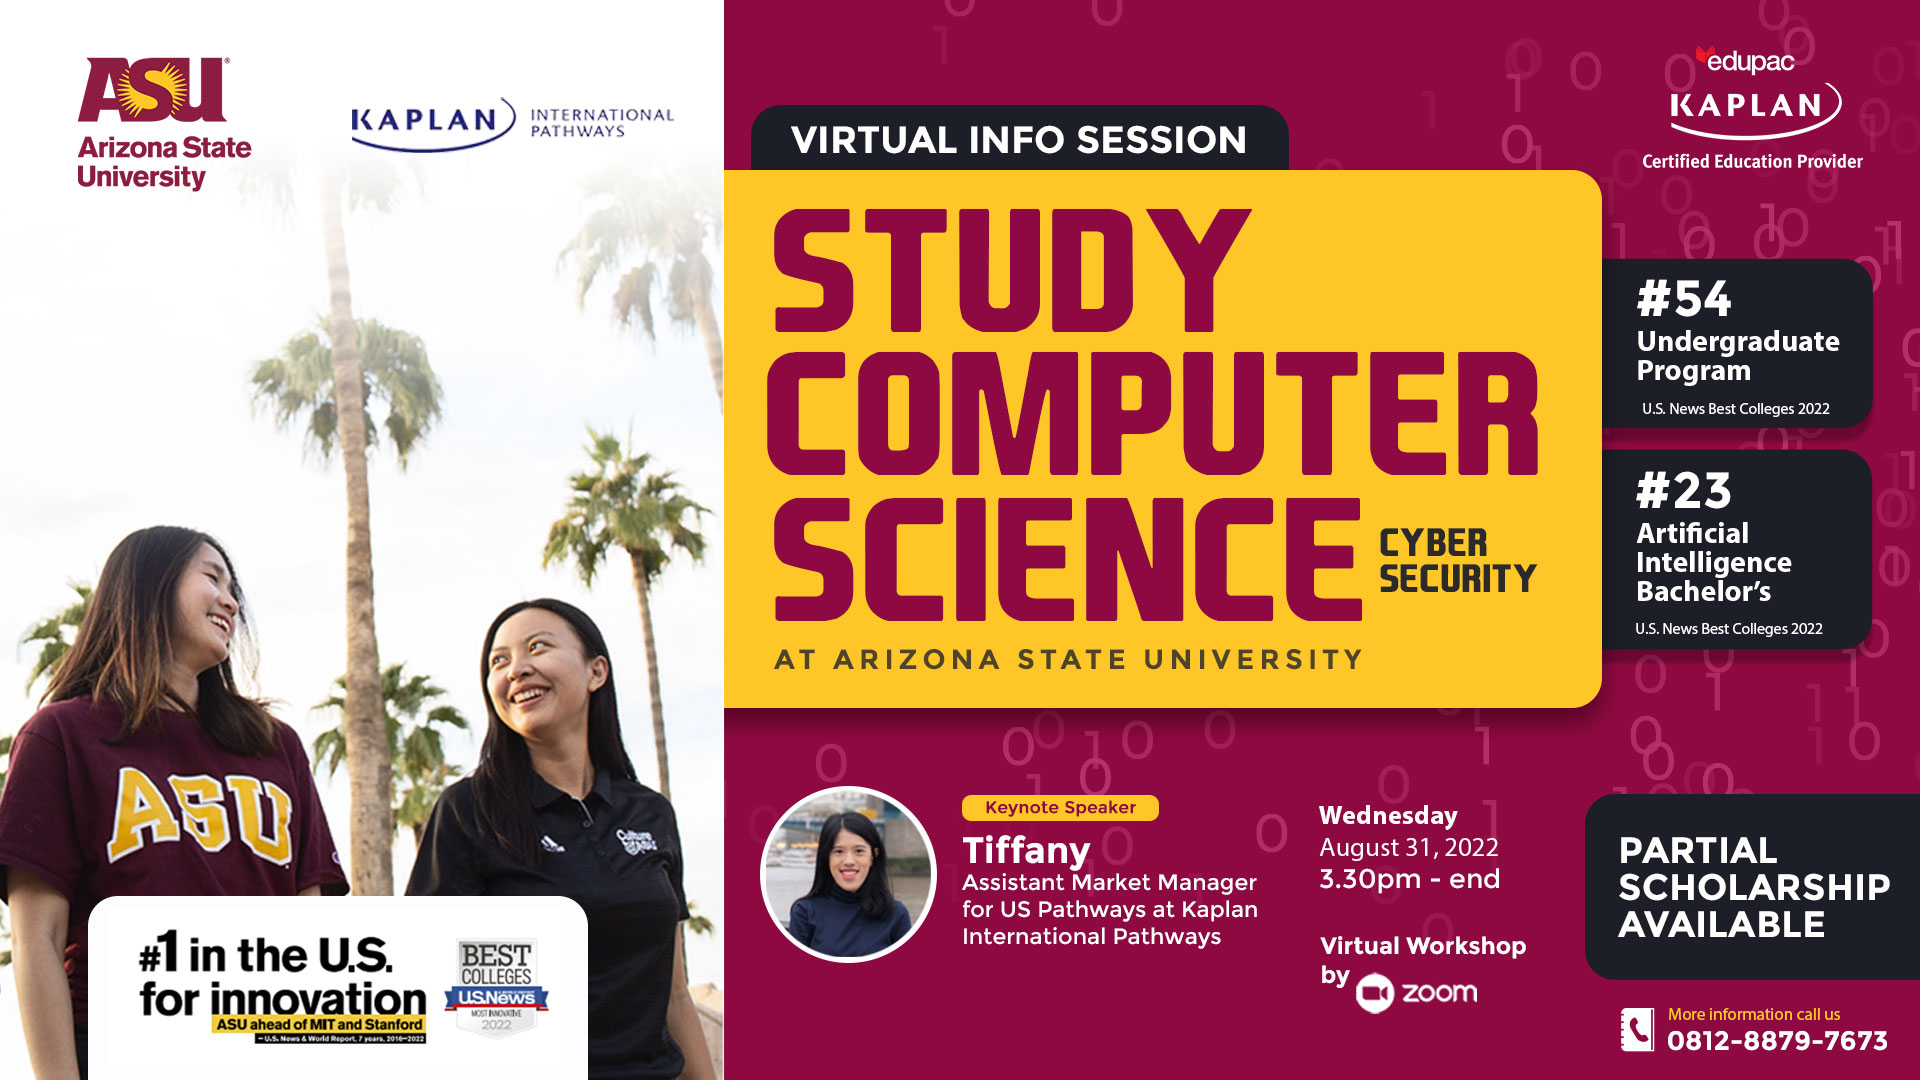 Free Webinar: Study Computer Science (Cyber Security) at Arizona State University with Kaplan International (Scholarship Available) 